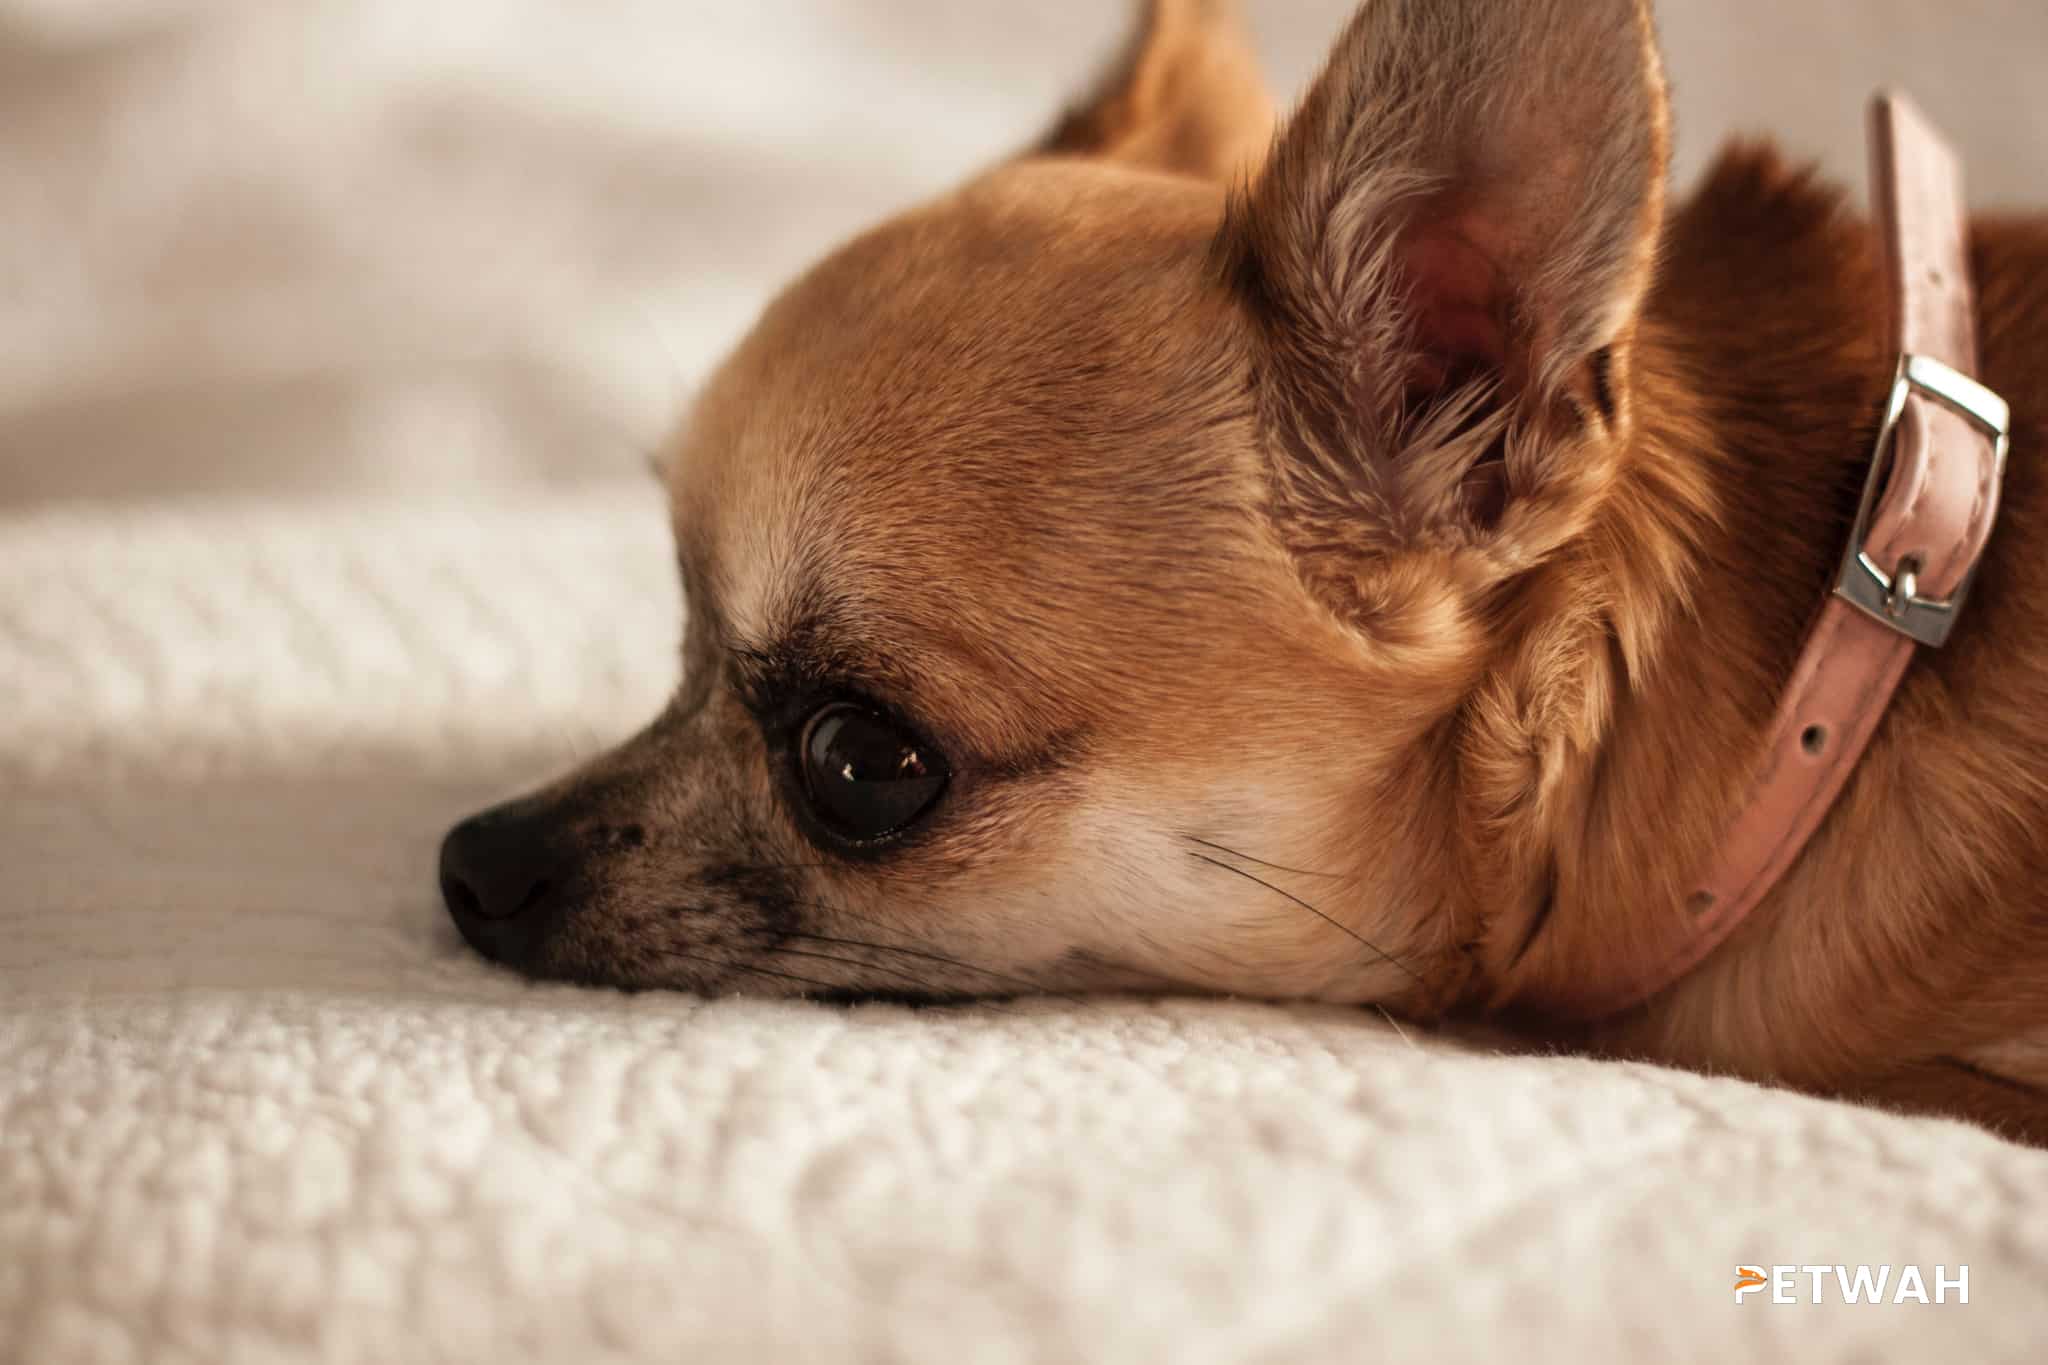 Top Exercise Strategies for Couples to Maintain Their Chihuahua's Health